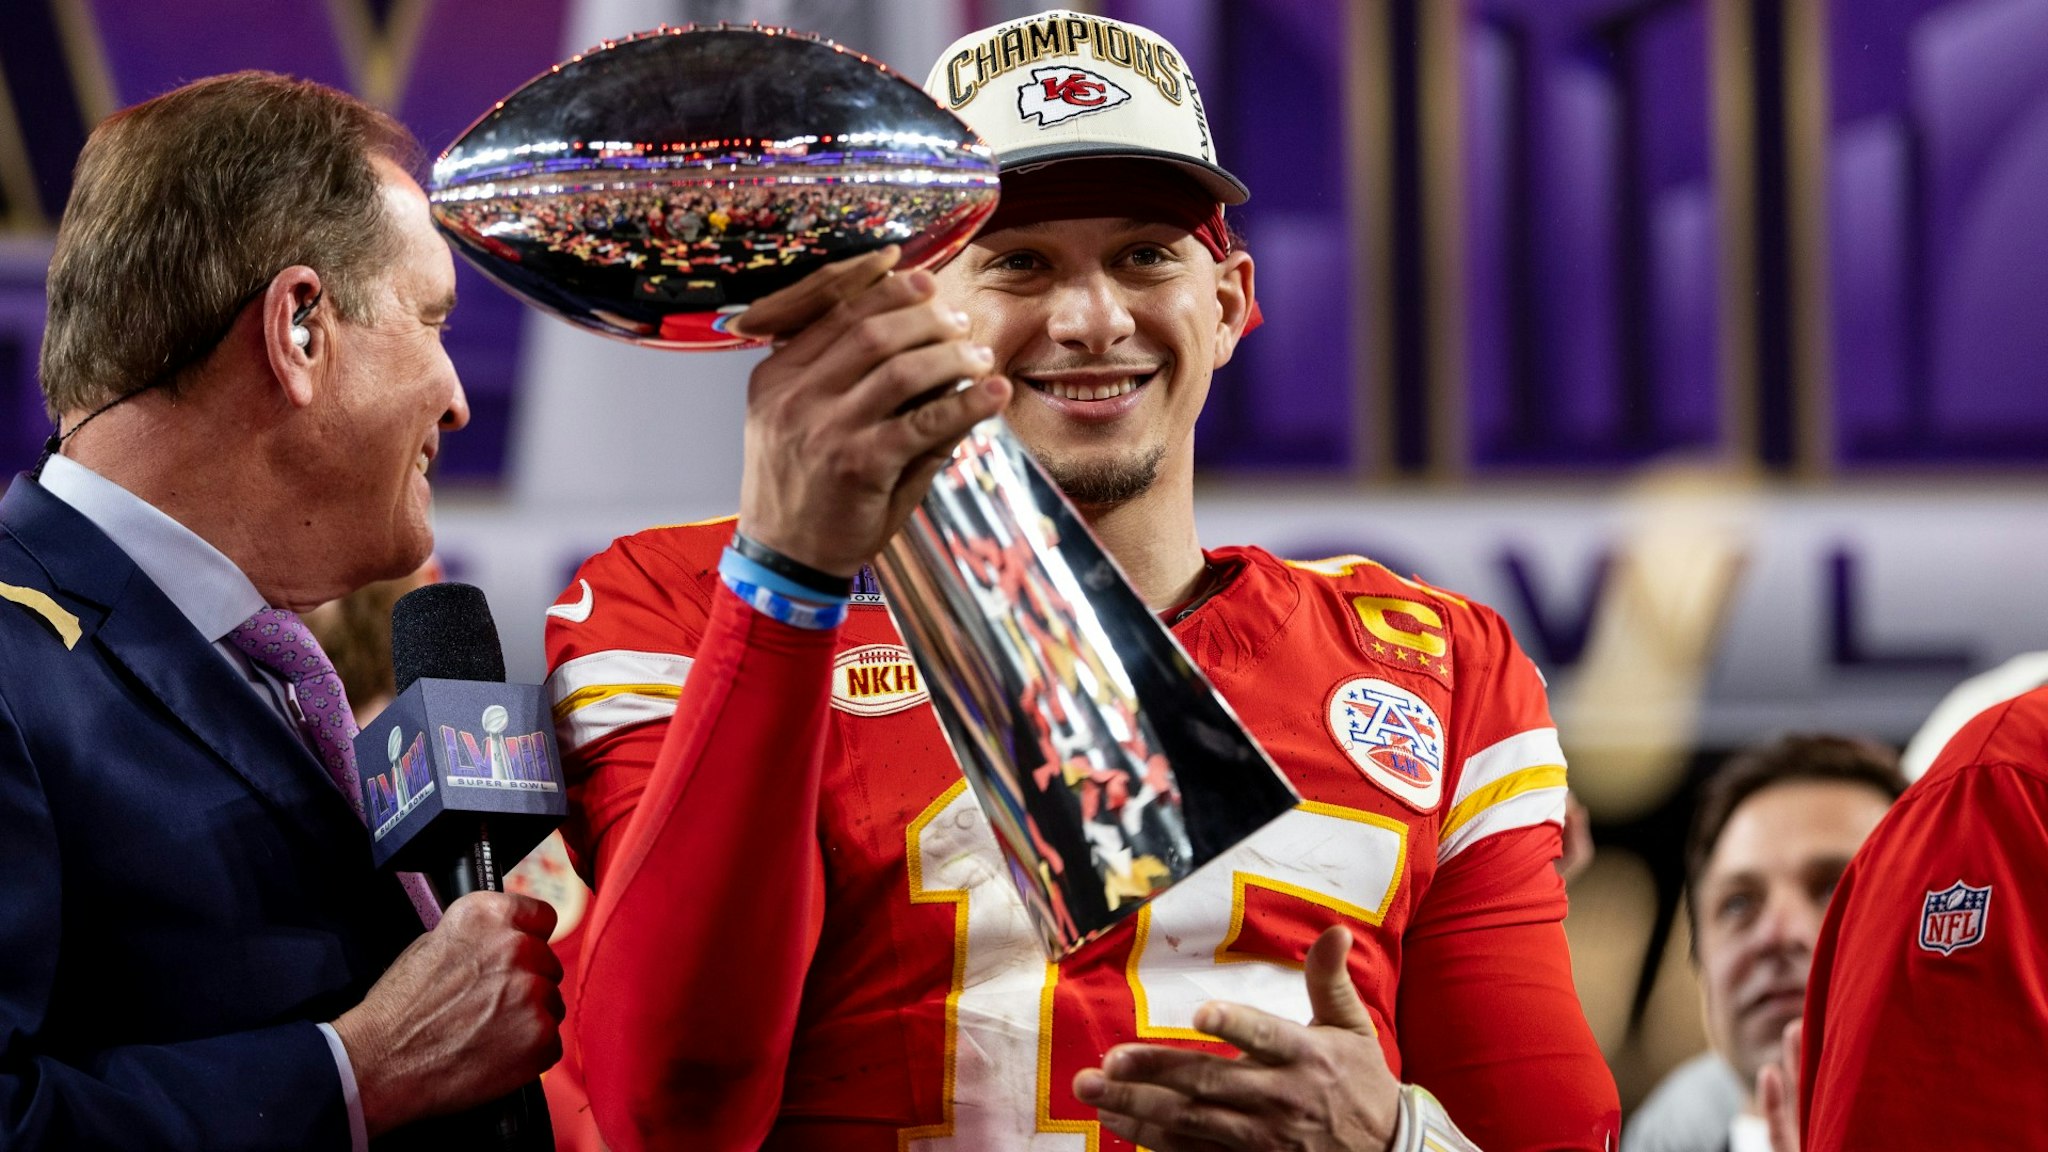 Patrick Mahomes #15 of the Kansas City Chiefs celebrates with the Vince Lombardi Trophy following the NFL Super Bowl 58 football game between the San Francisco 49ers and the Kansas City Chiefs at Allegiant Stadium on February 11, 2024 in Las Vegas, Nevada.